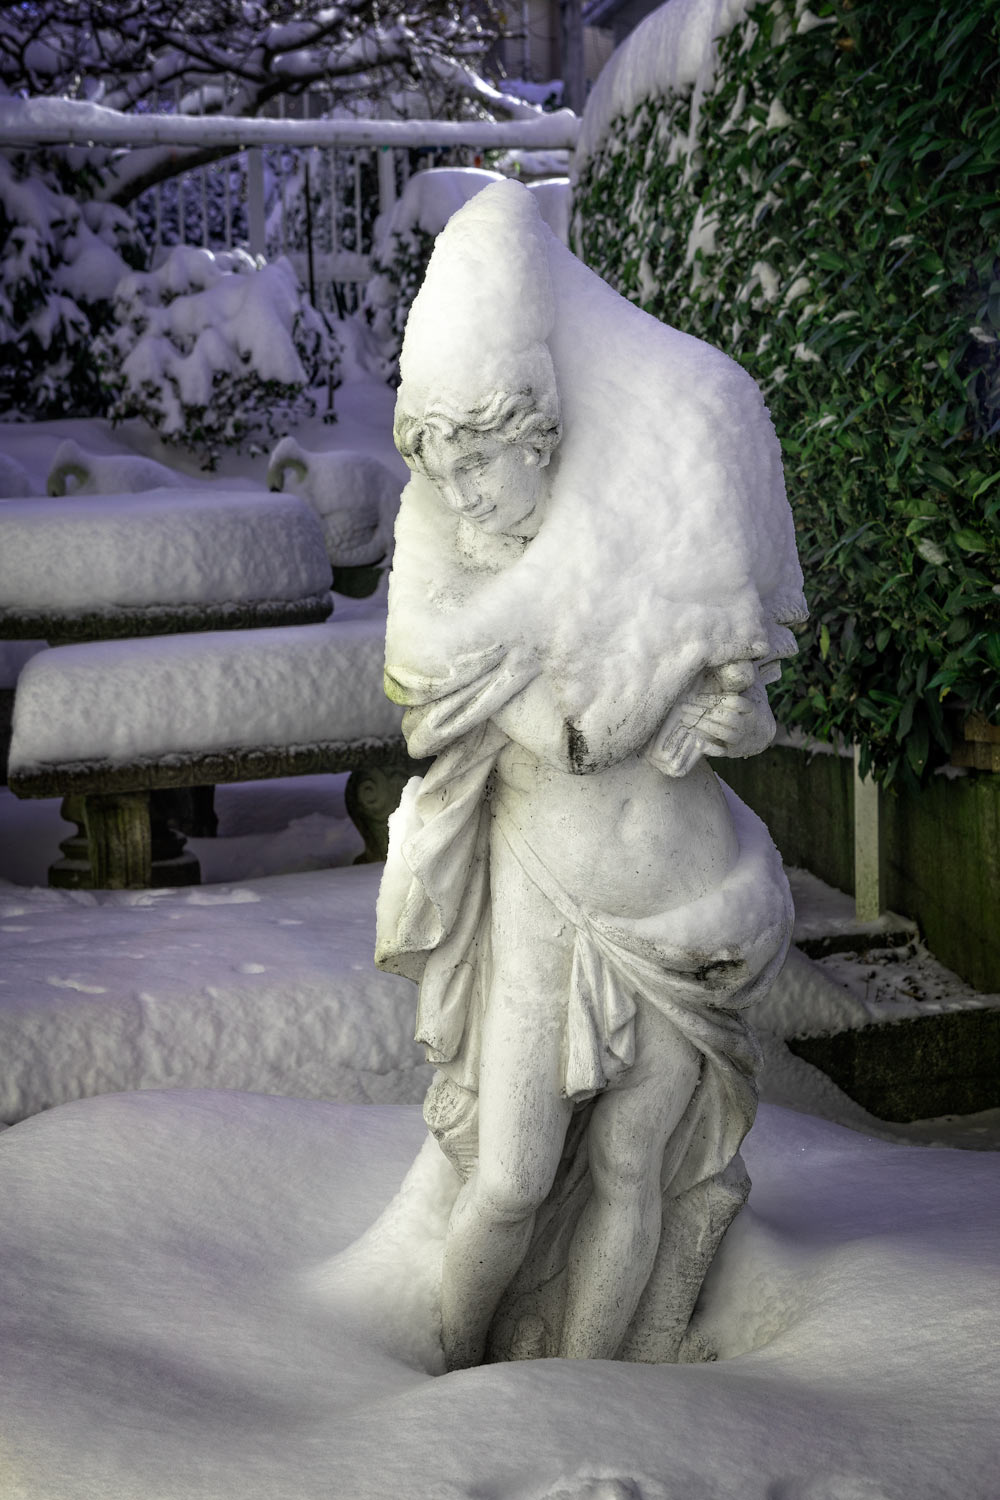 Statue of a lAdy in the Garden heaped with Snow.